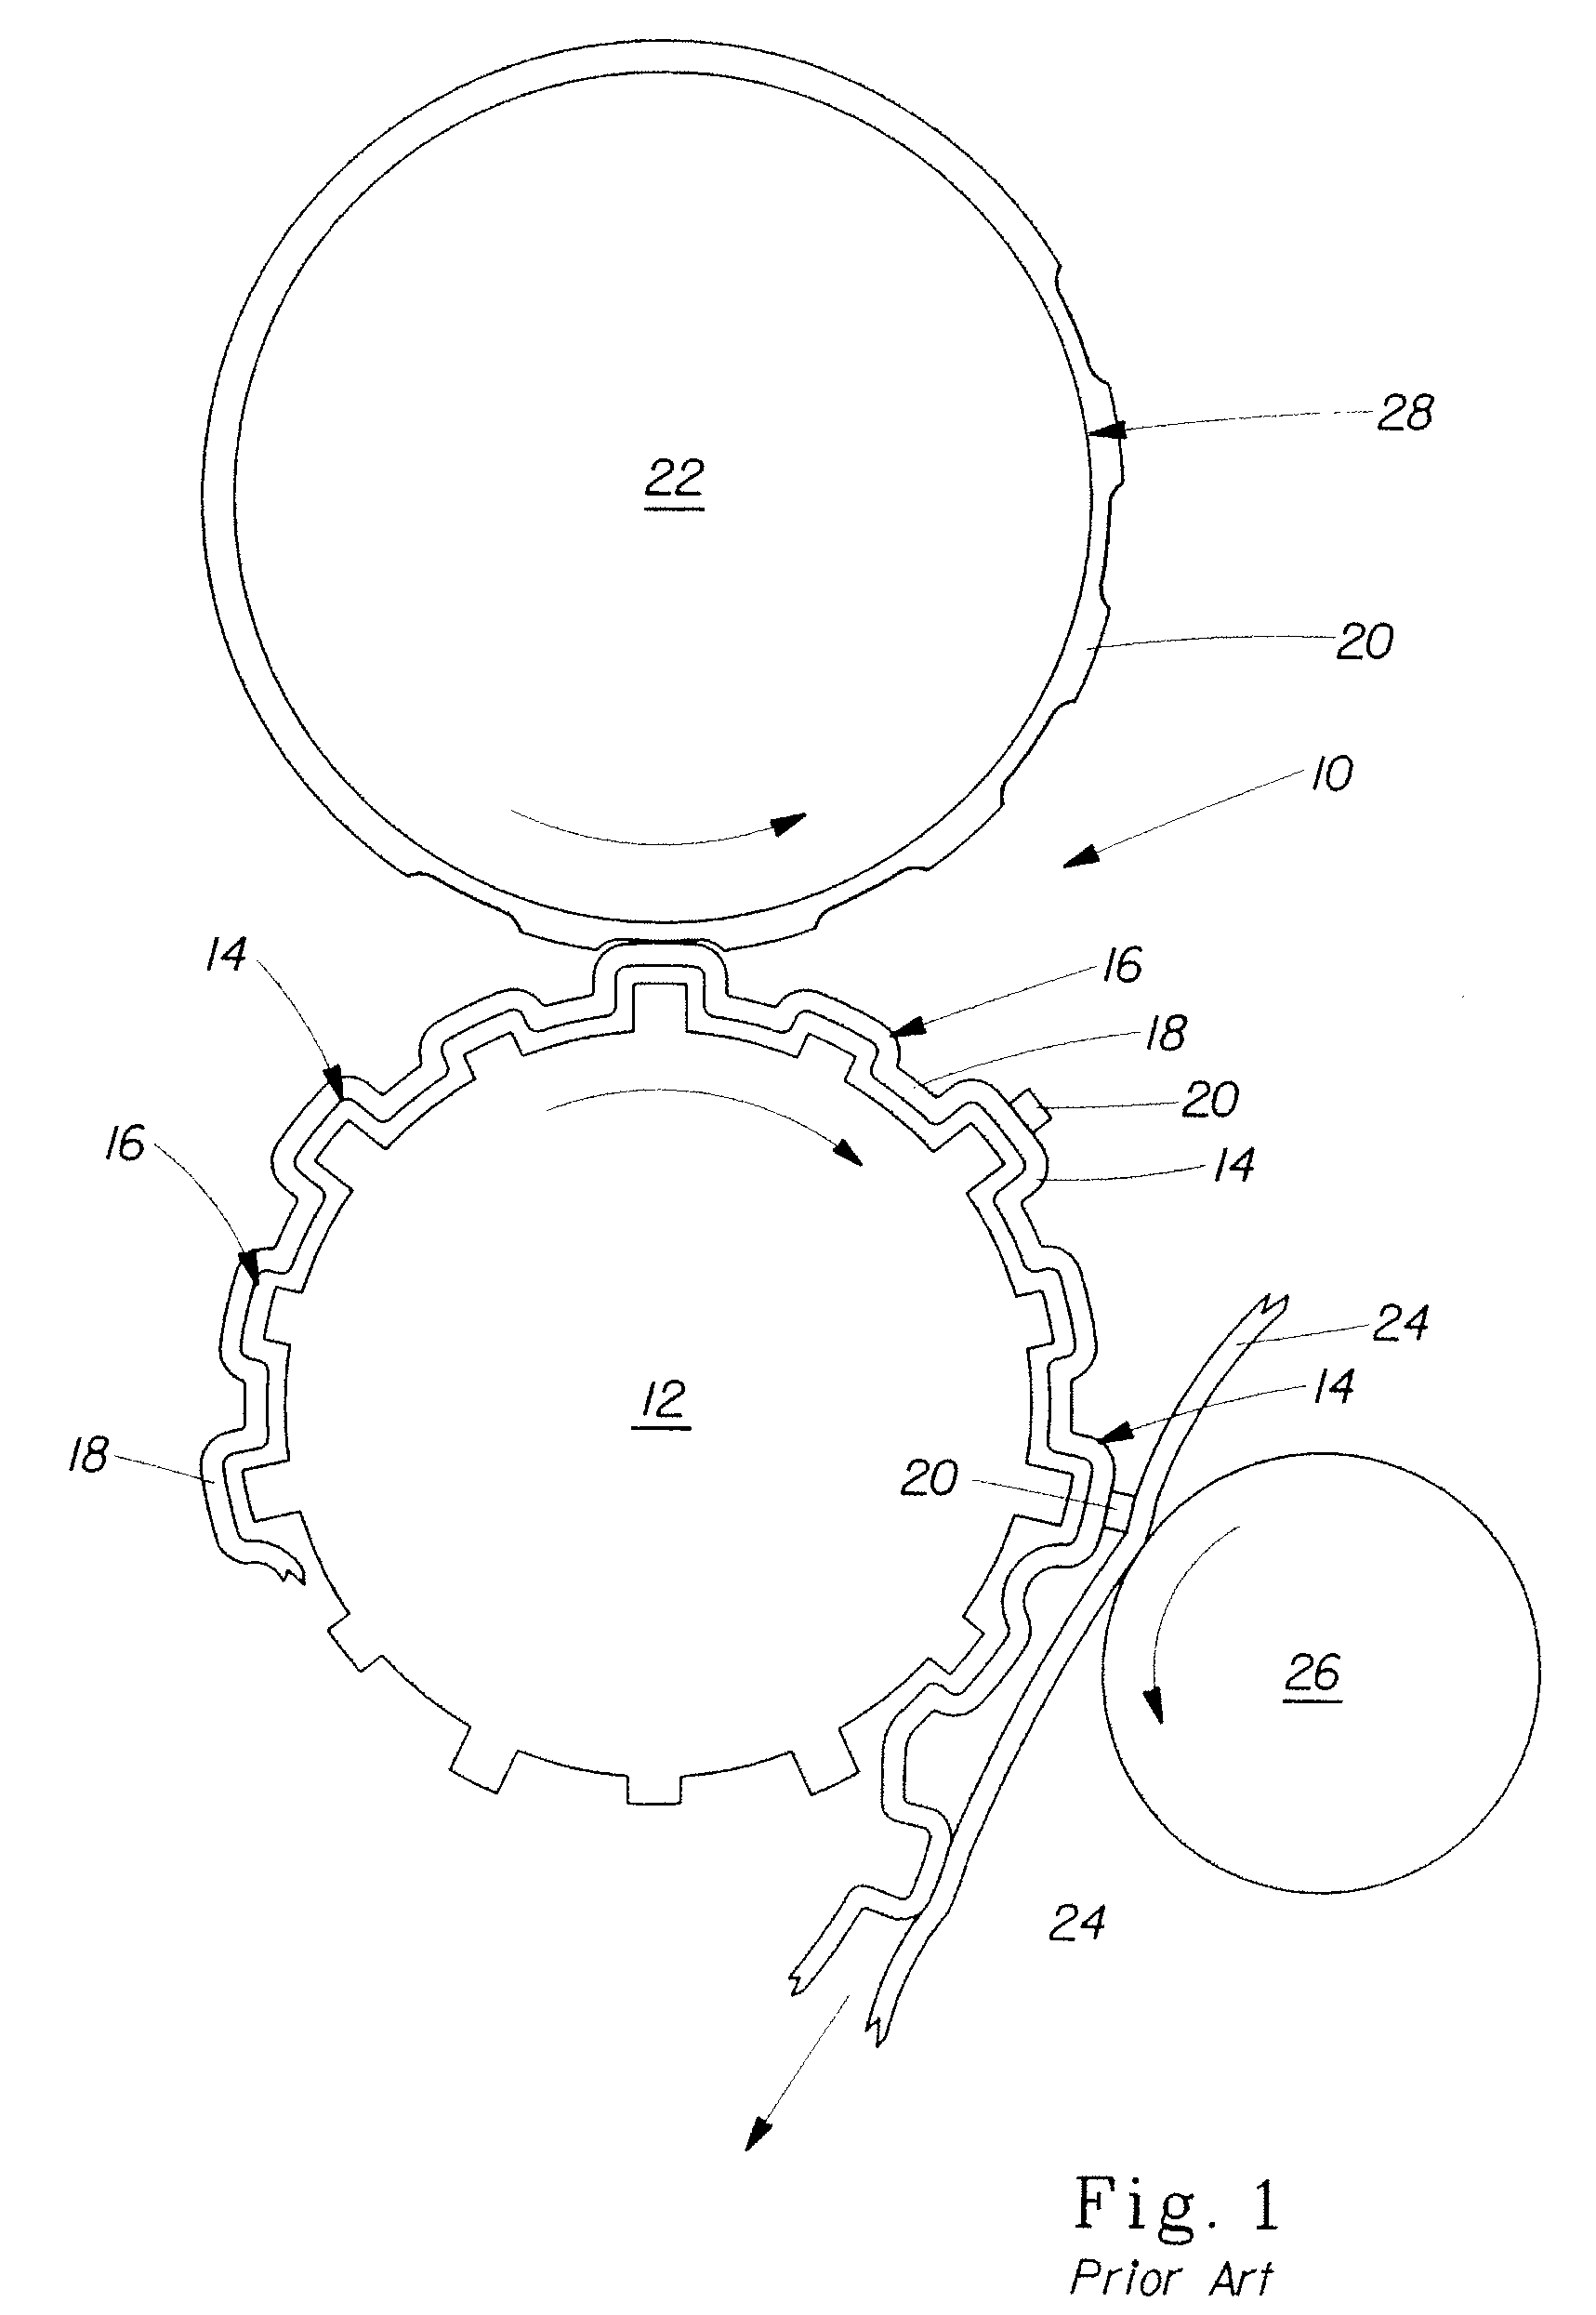 Multi-ply fibrous structures and processes for making same